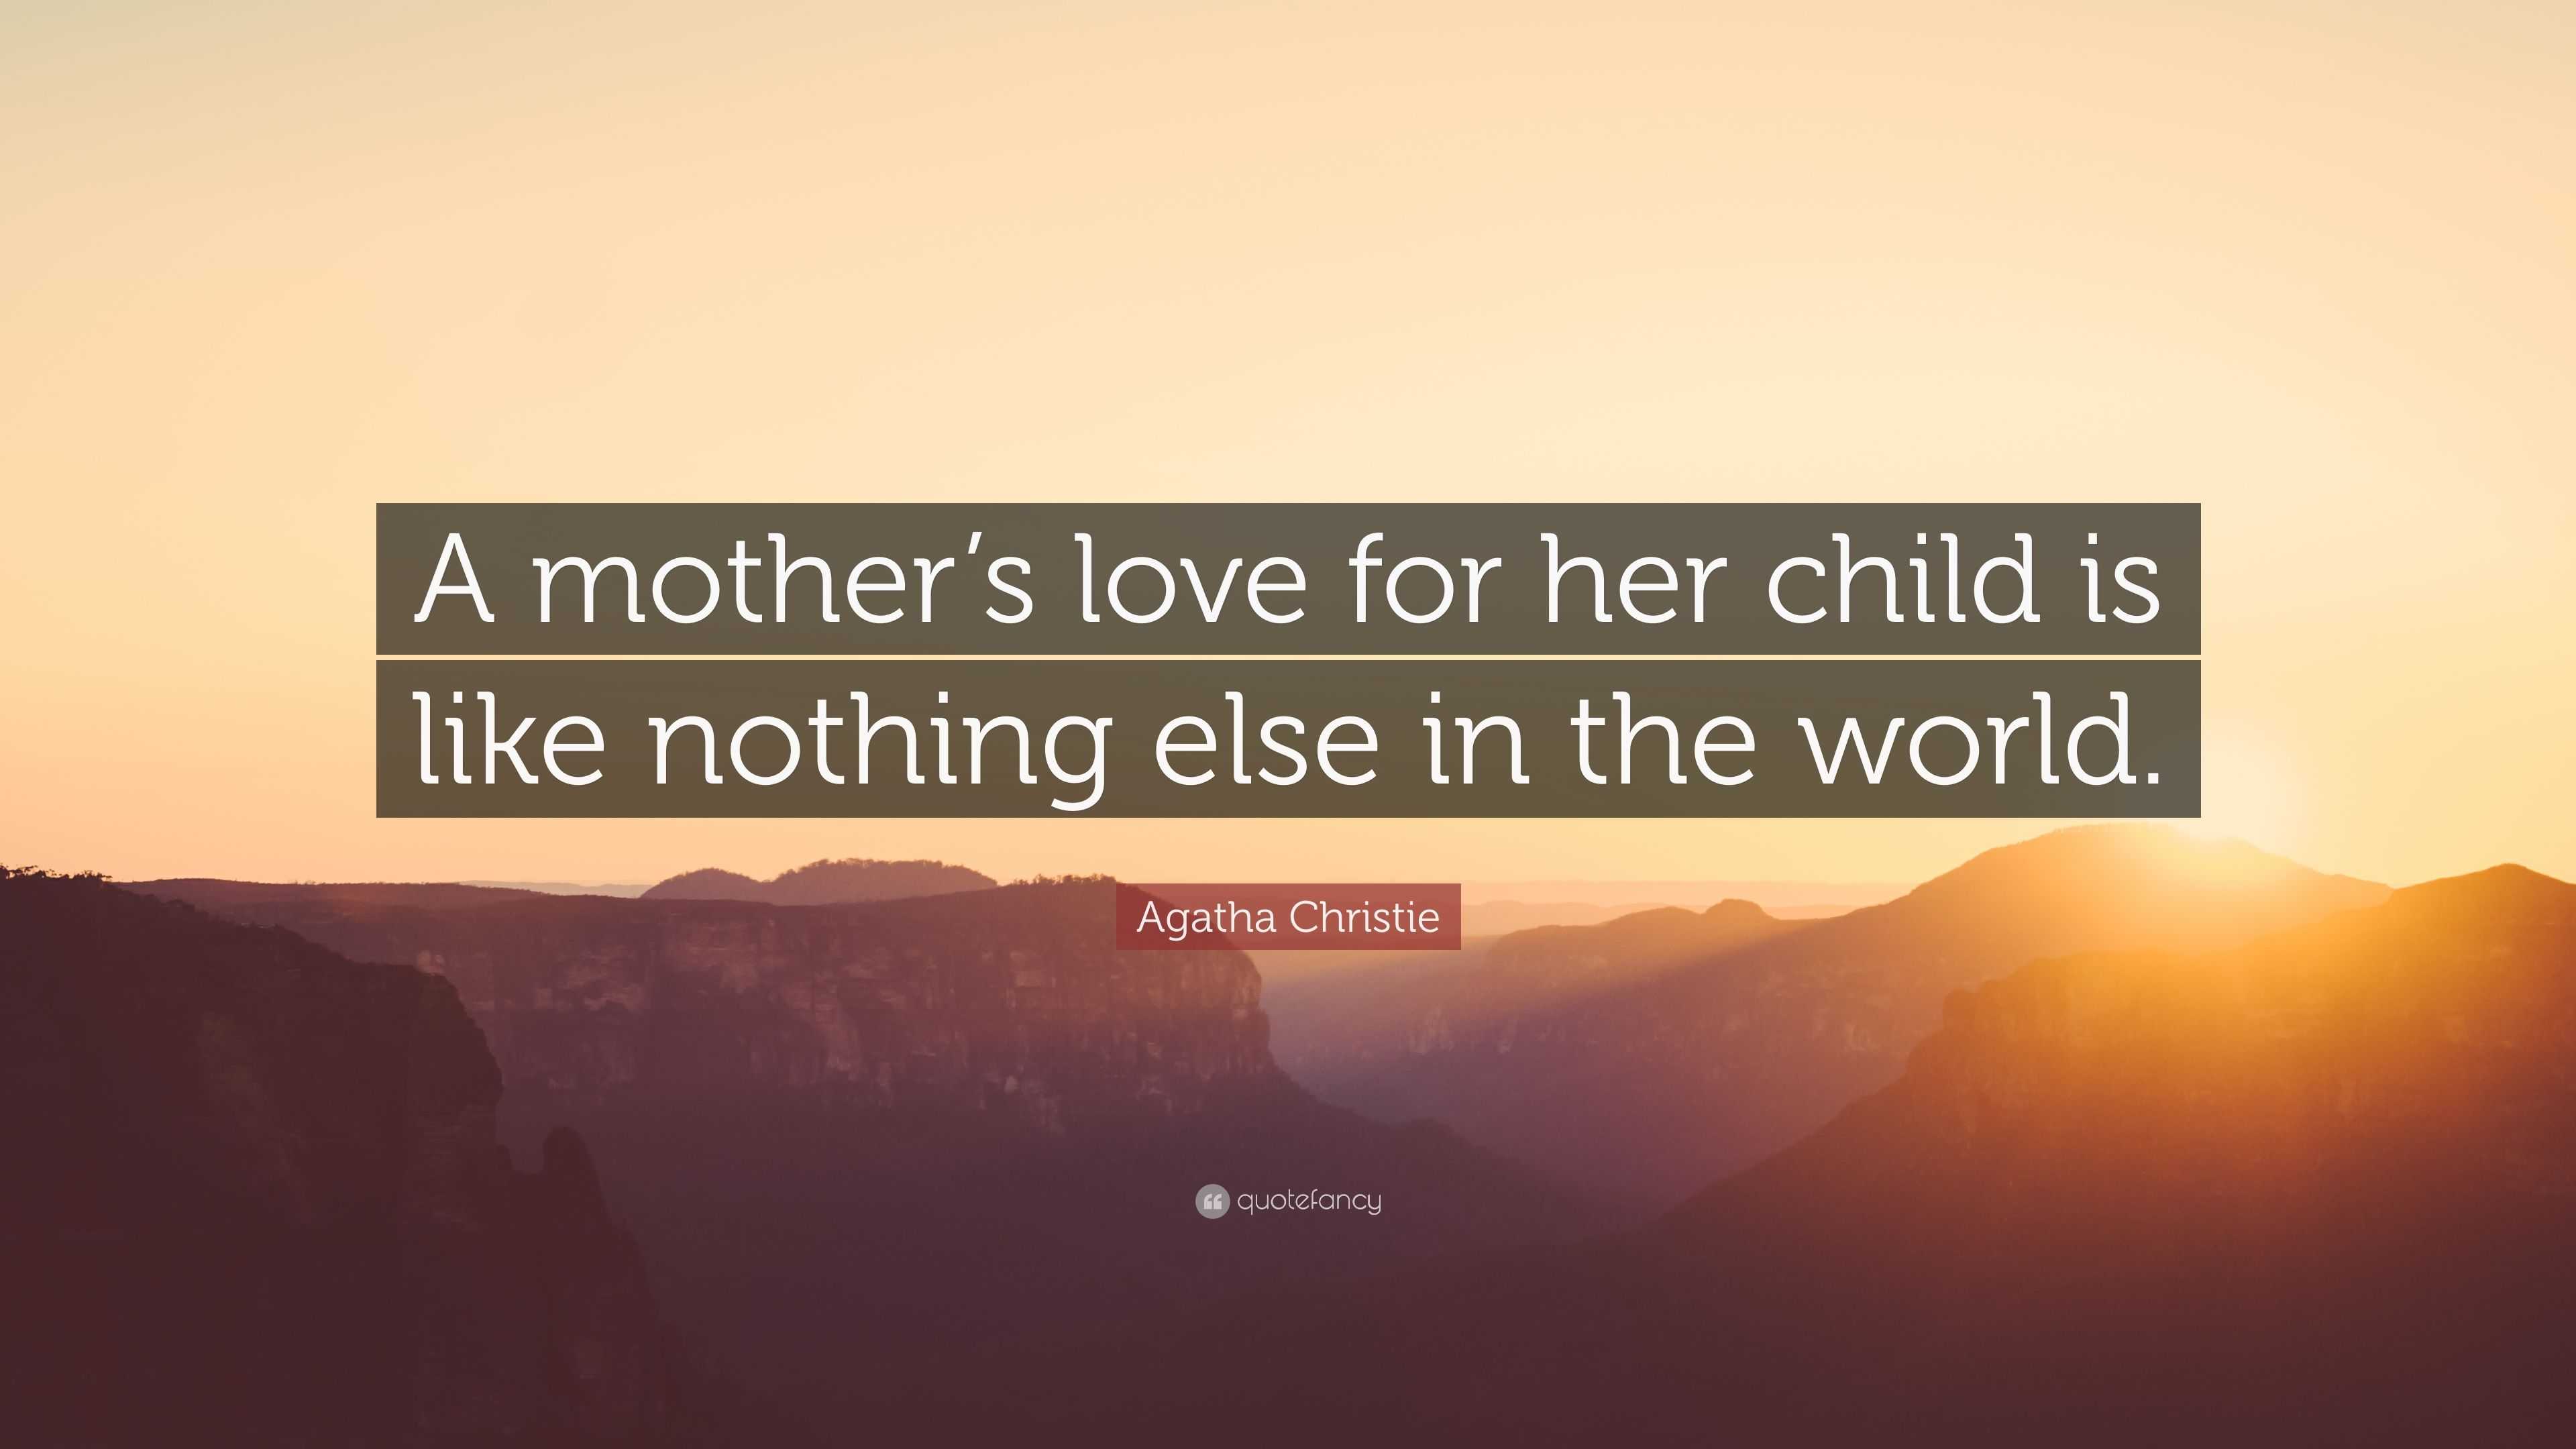 Agatha Christie Quote: “A mother’s love for her child is like nothing ...